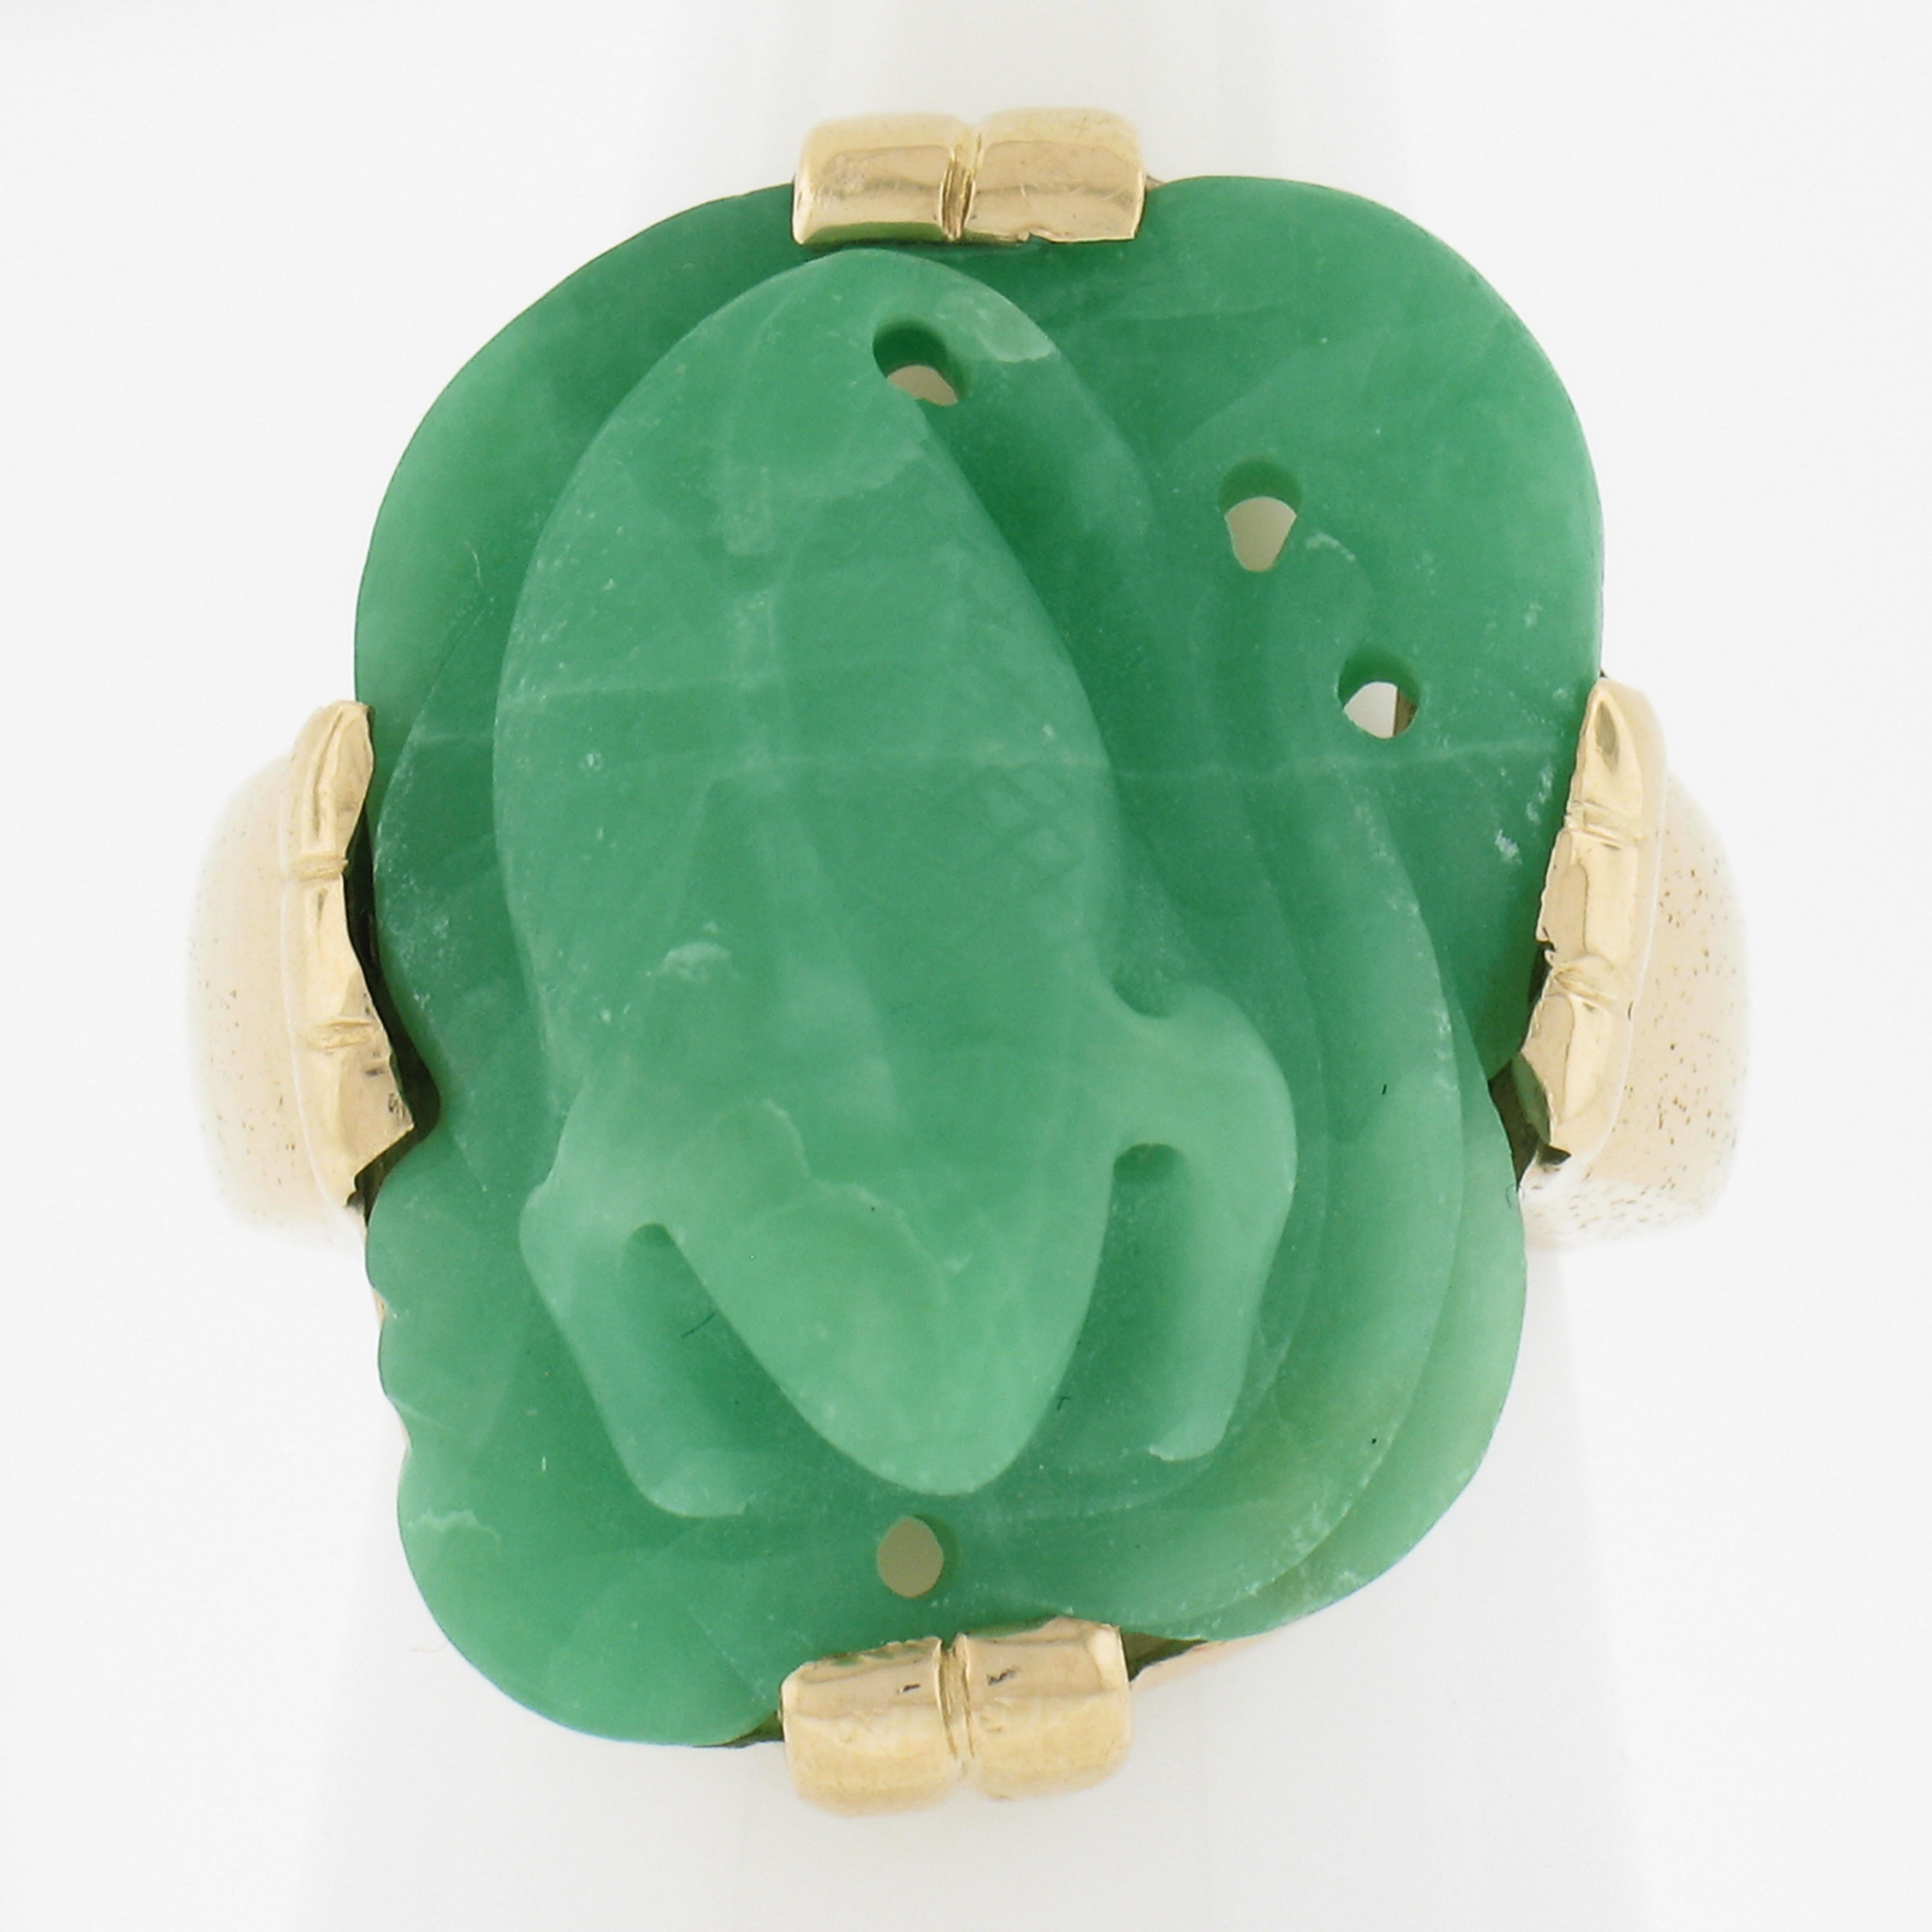 --Stone(s):--
(1) Natural Genuine Jade - Carved - Prong Set - Marbled Green & White Color - 21.5x17.2mm (approx.)

Material: Solid 14k Yellow Gold
Weight: 14.28 Grams
Ring Size: 6.5 (Fitted on a finger. We can custom size this ring - please contact